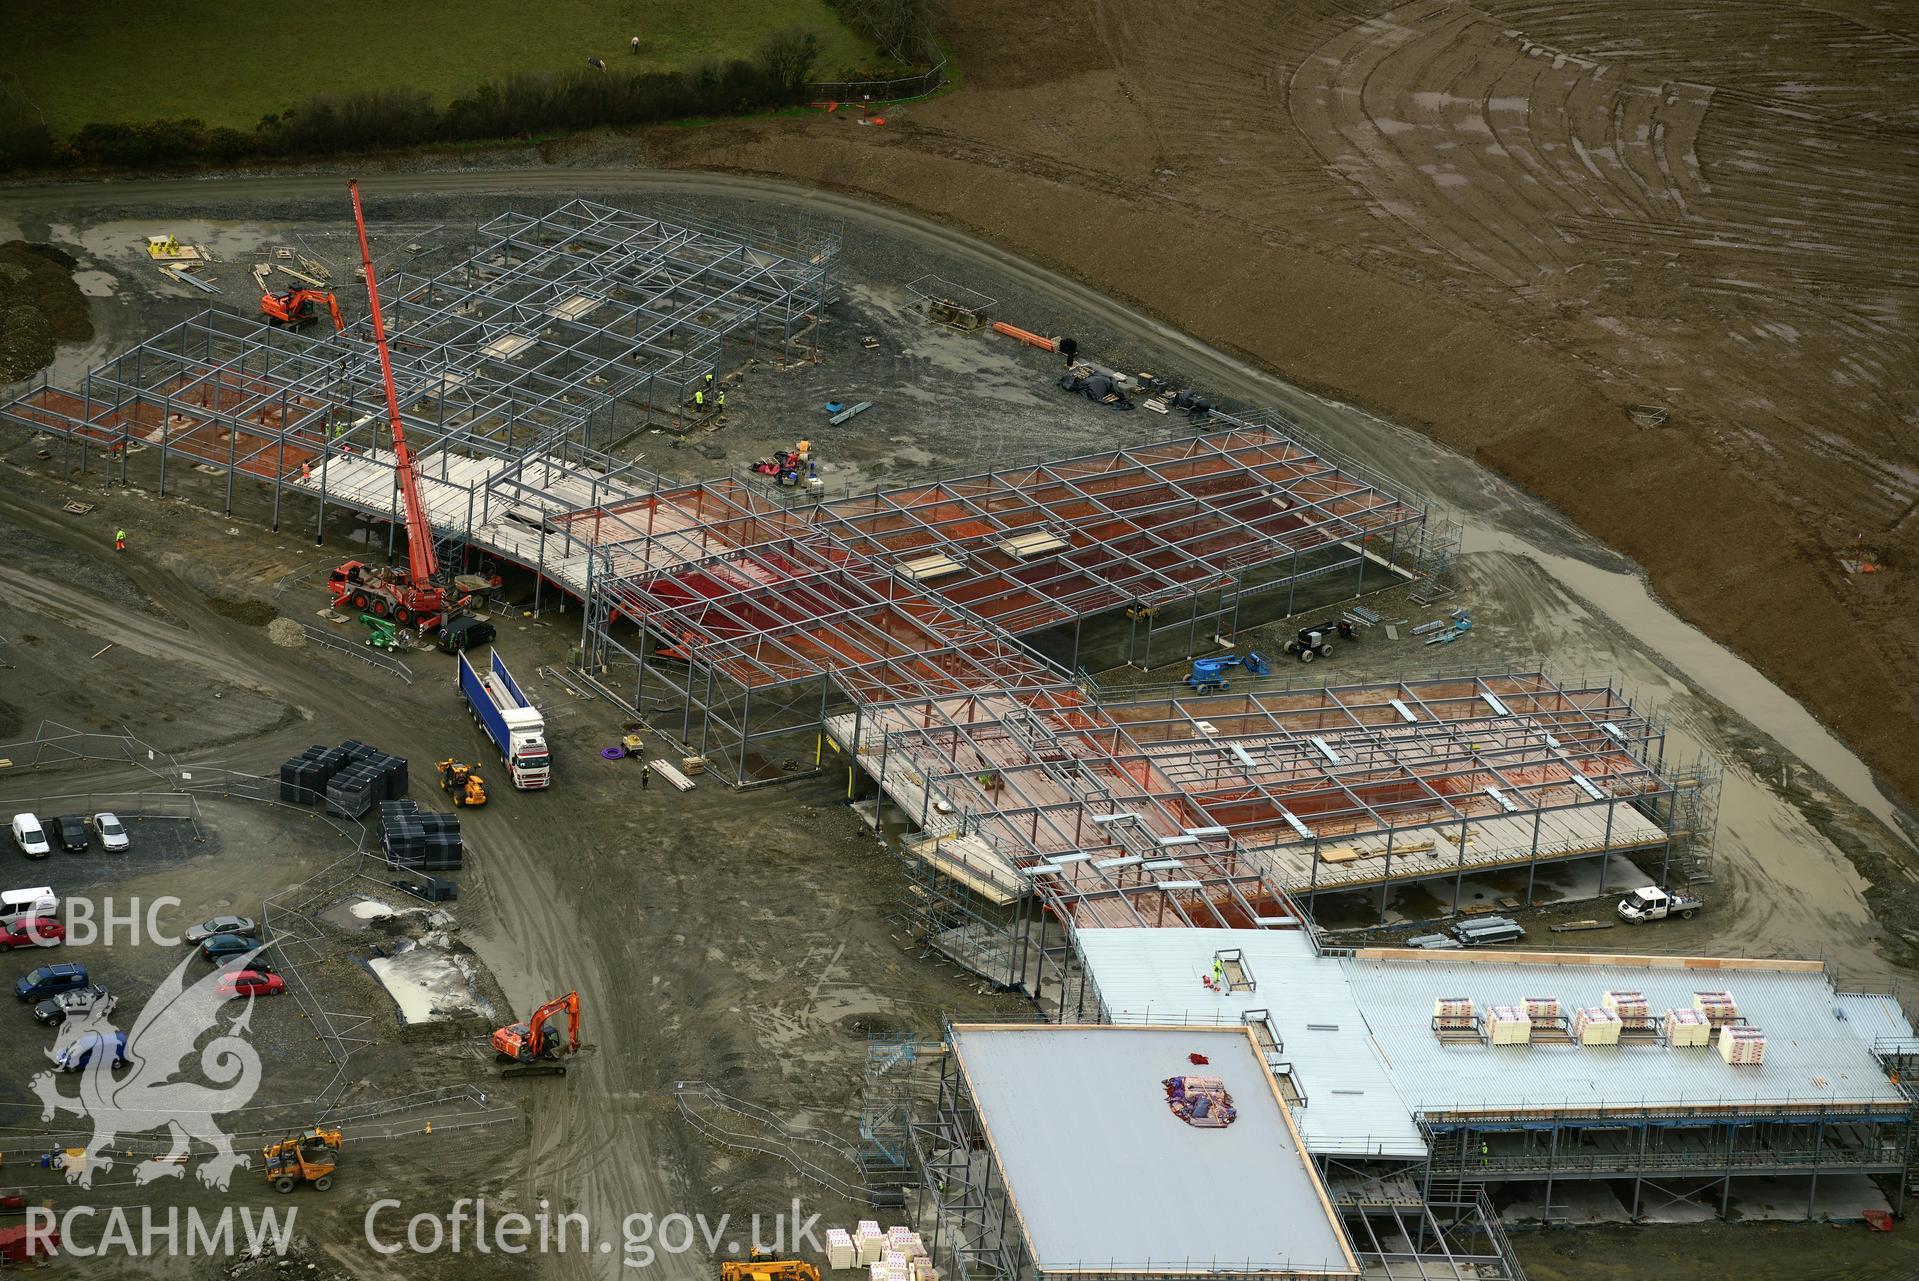 Ysgol Bro Teifi under construction on the northern outskirts of Llandysul. Oblique aerial photograph taken during the Royal Commission's programme of archaeological aerial reconnaissance by Toby Driver on 13th March 2015.